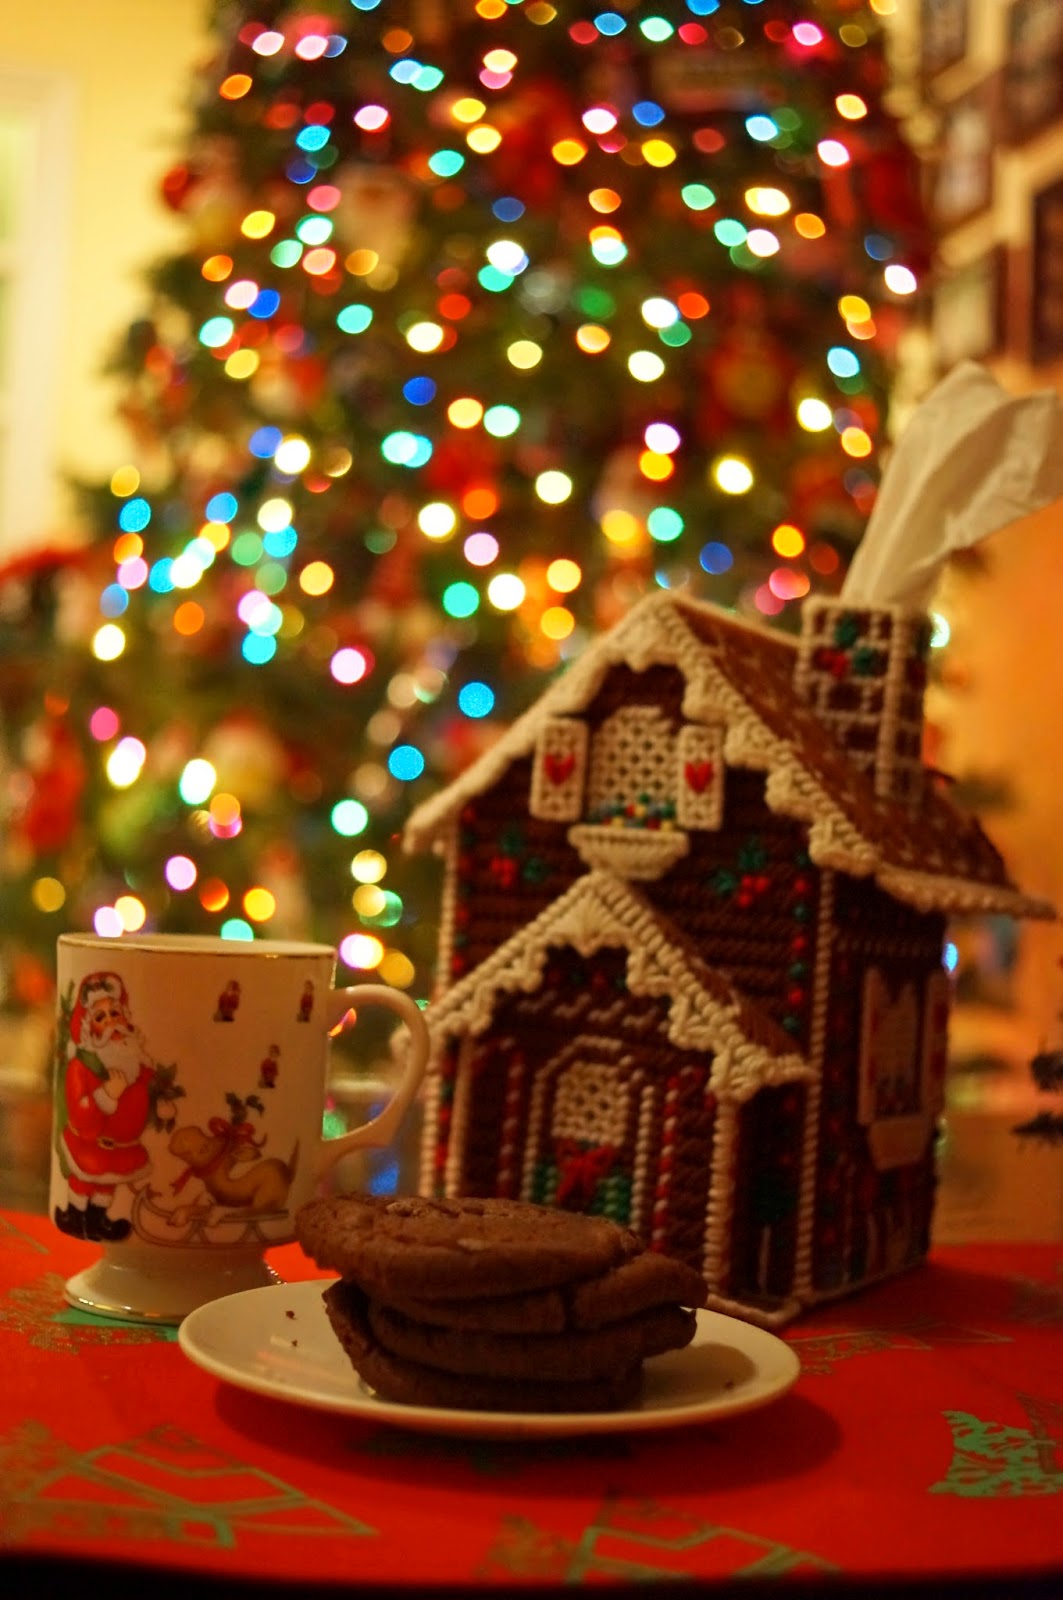 Cute Gingerbread House and Christmas Cookies